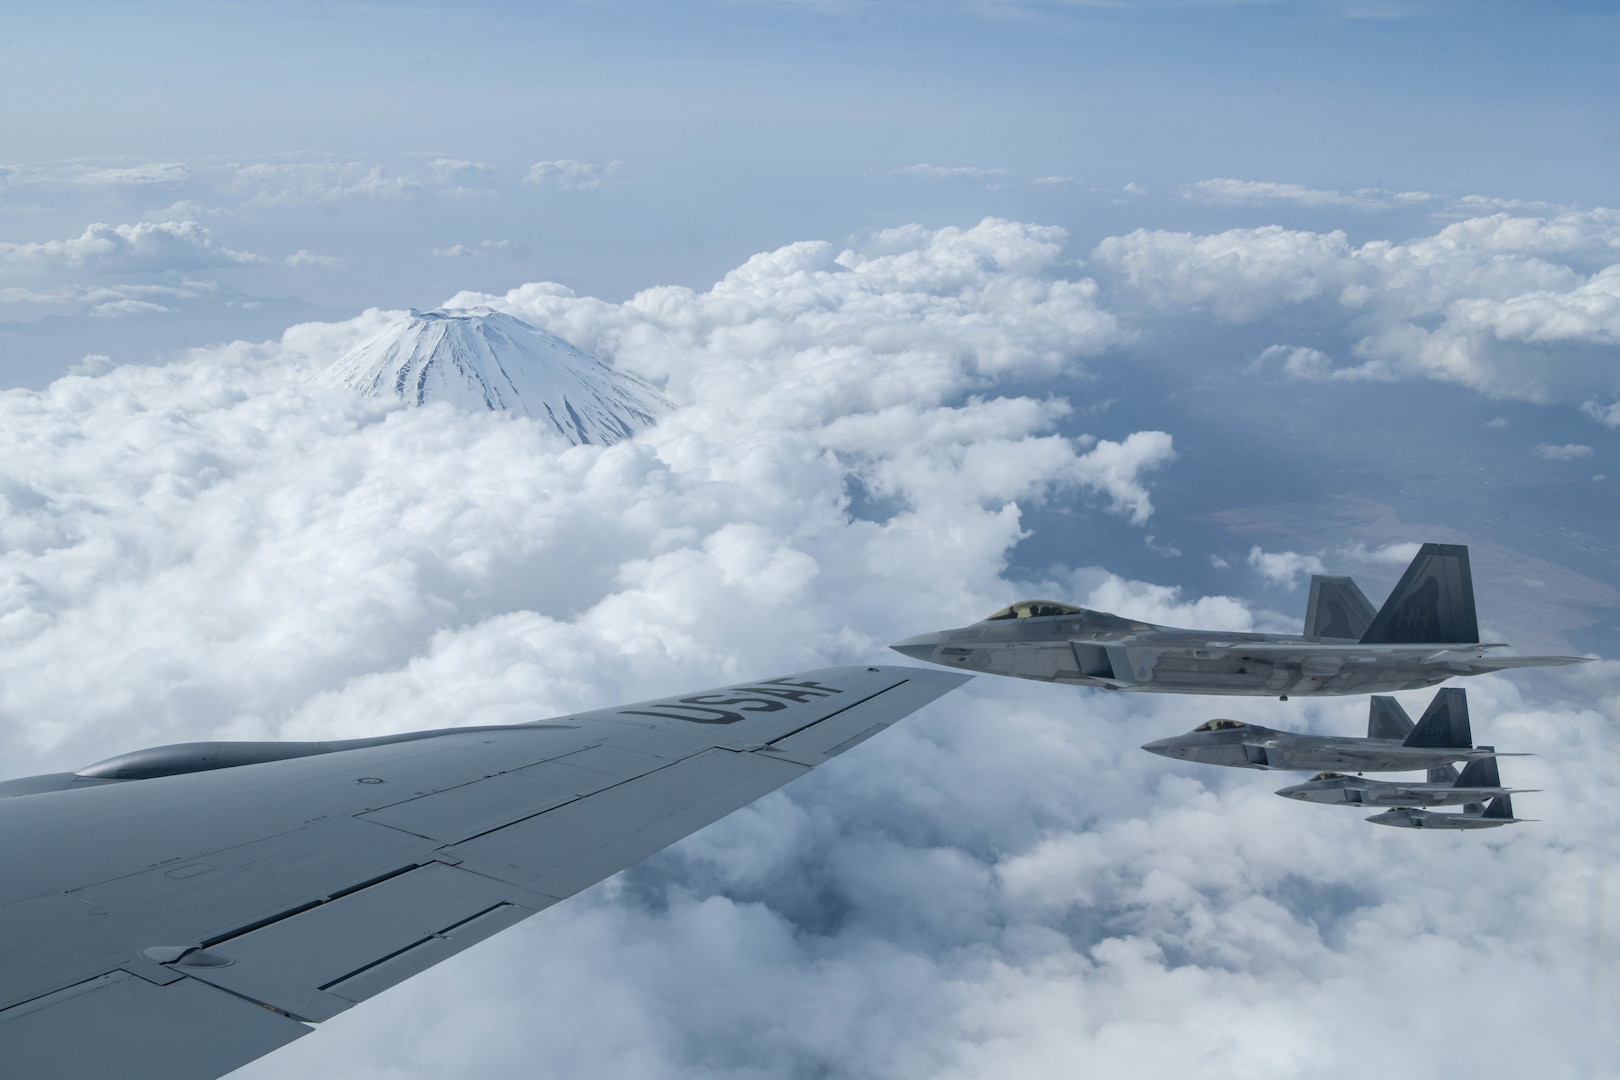 U.S Air Force Raptors from the 199th Fighter Squadron fly alongside a USAF KC-135 Stratotanker from the 909th Air Refueling Squadron during fifth-generation fighter training near Mount Fuji, Japan, April 1, 2021. The F-22 Raptors were operating out of Marine Corps Air Station Iwakuni, Japan, to support the U.S. Indo-Pacific Command’s dynamic force employment concept.